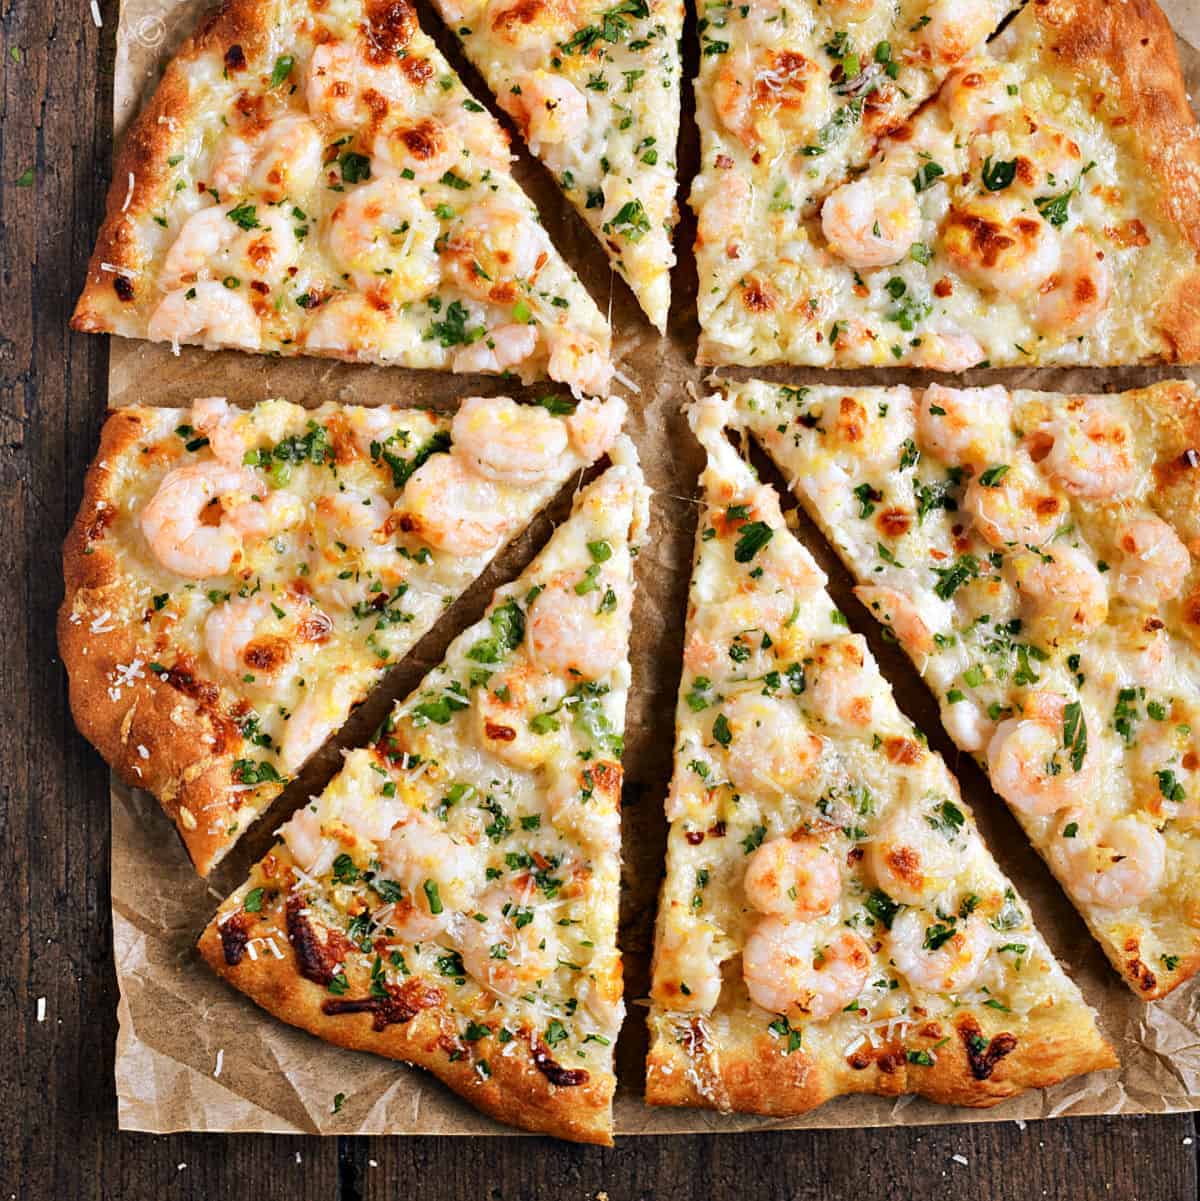 A pizza topped with shrimp, melted cheese and chopped parsley.